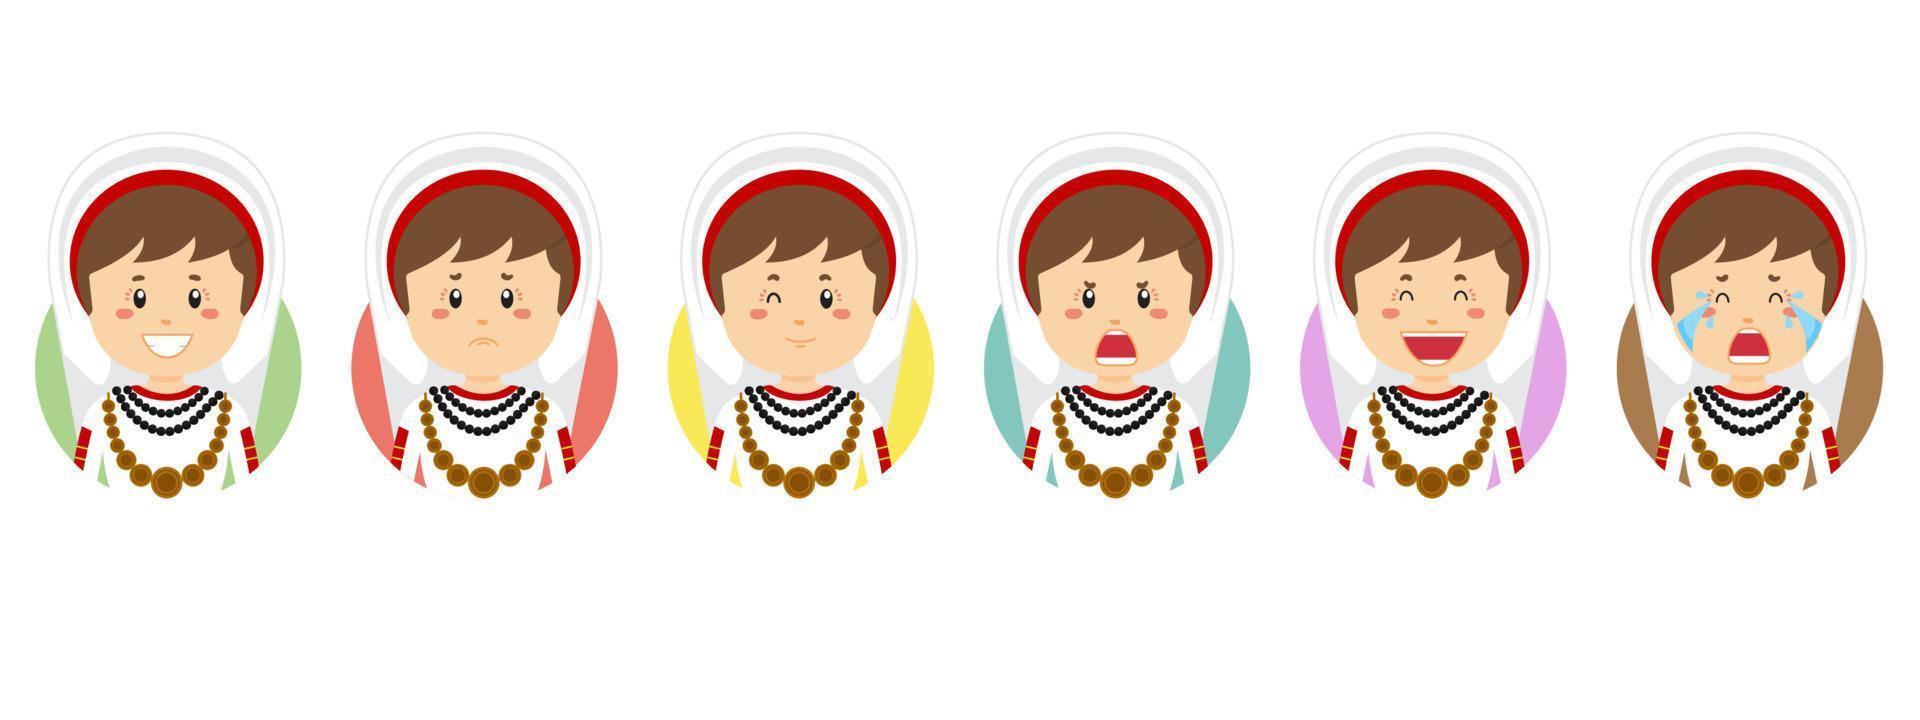 Romanians Avatar with Various Expression vector